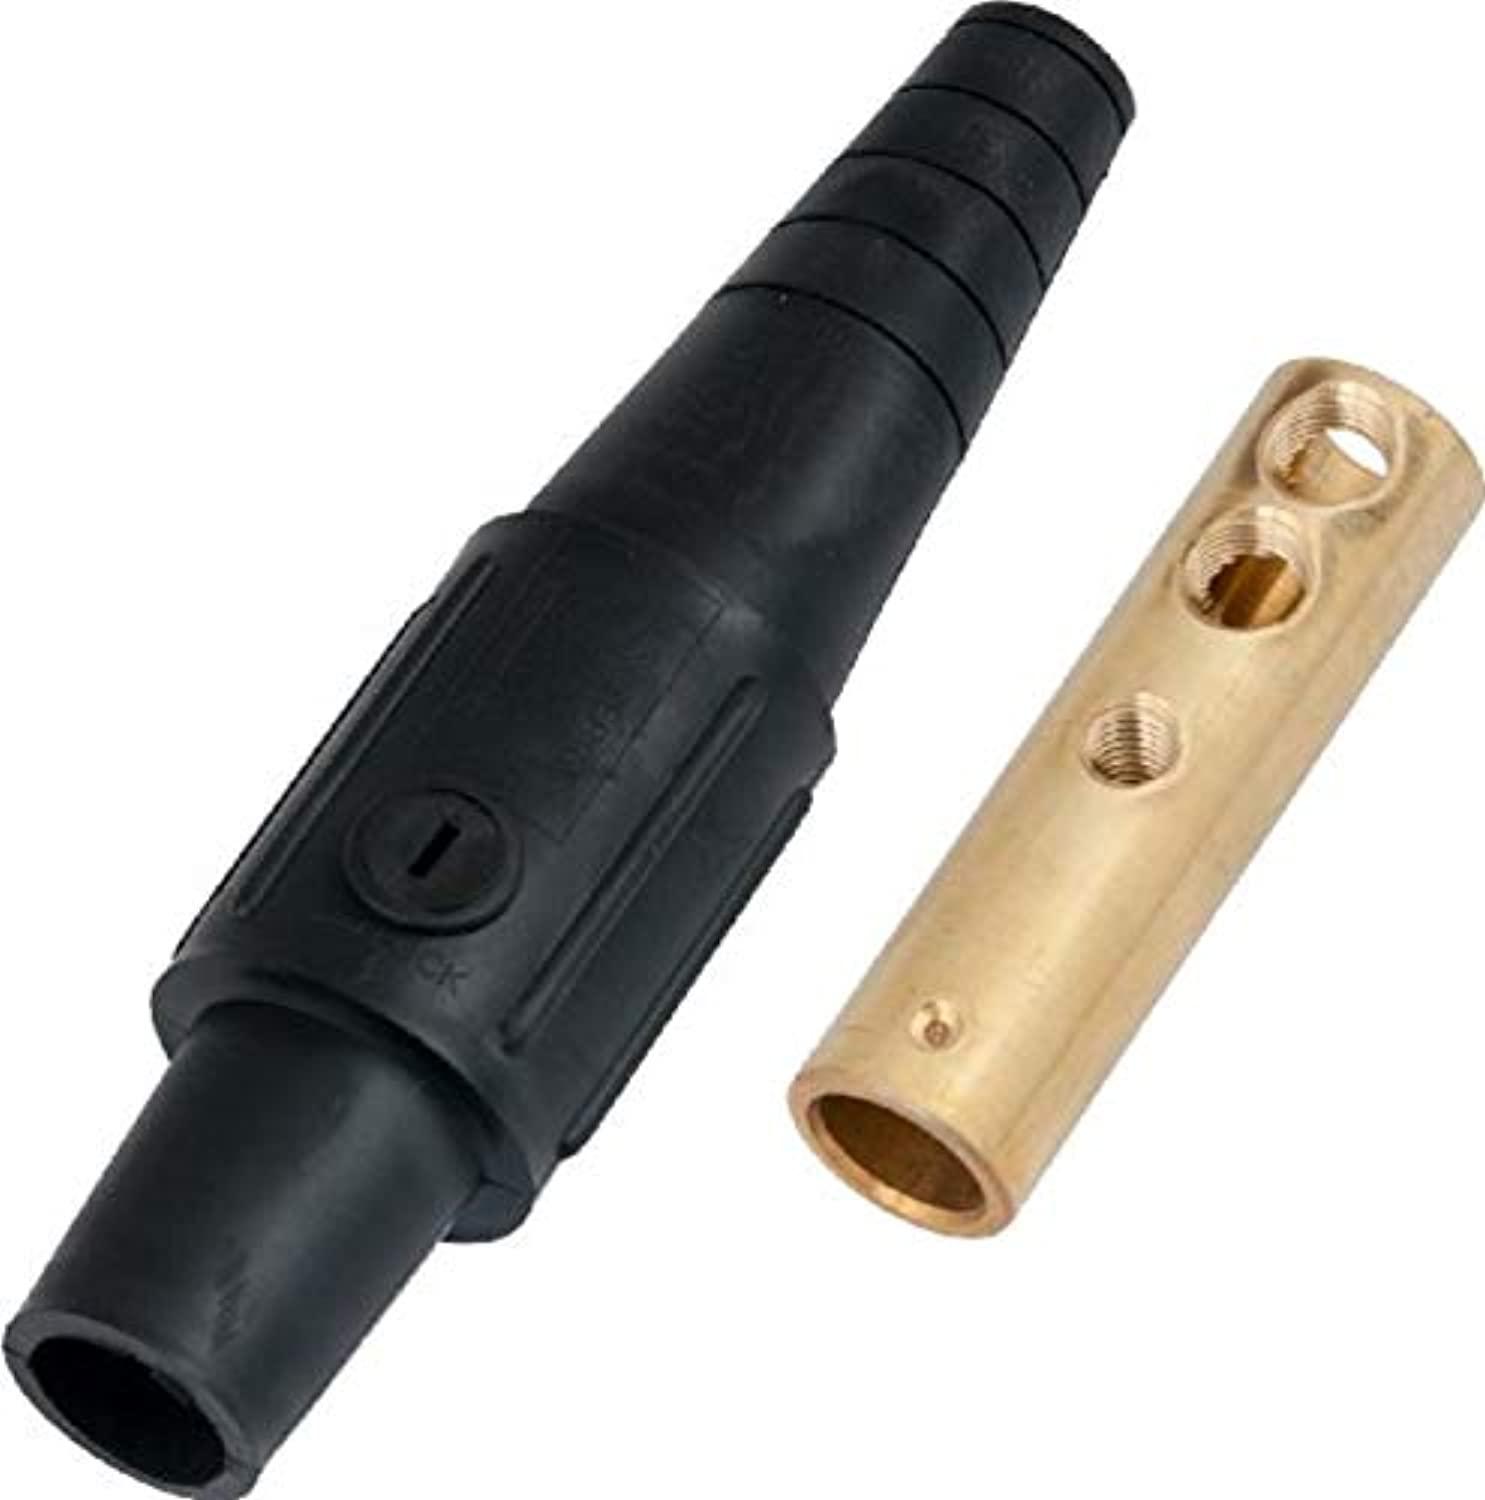 Marinco Power Products - Industrial marinco cls2fb-a cls cam type, series 16 inline, single pin connector, 400 amp, 600 volt, 6 - #2 awg, female - black (a)